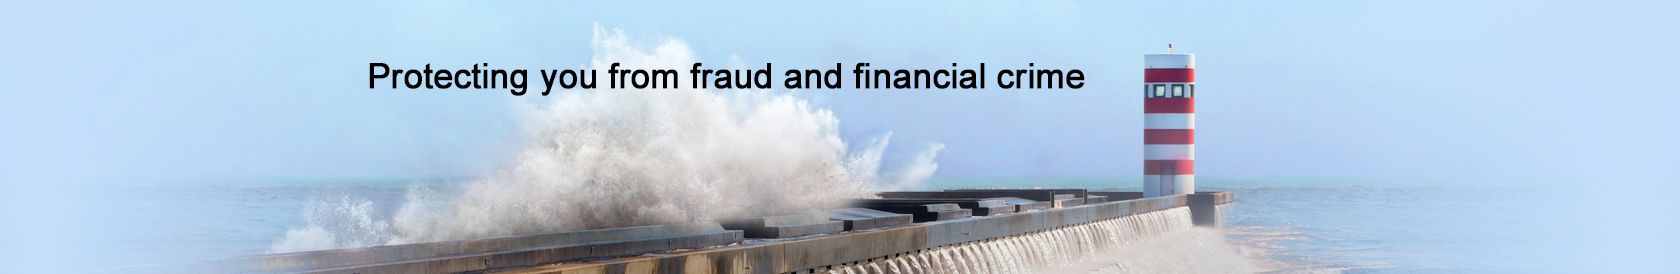 Protecting you from fraud and financial crime